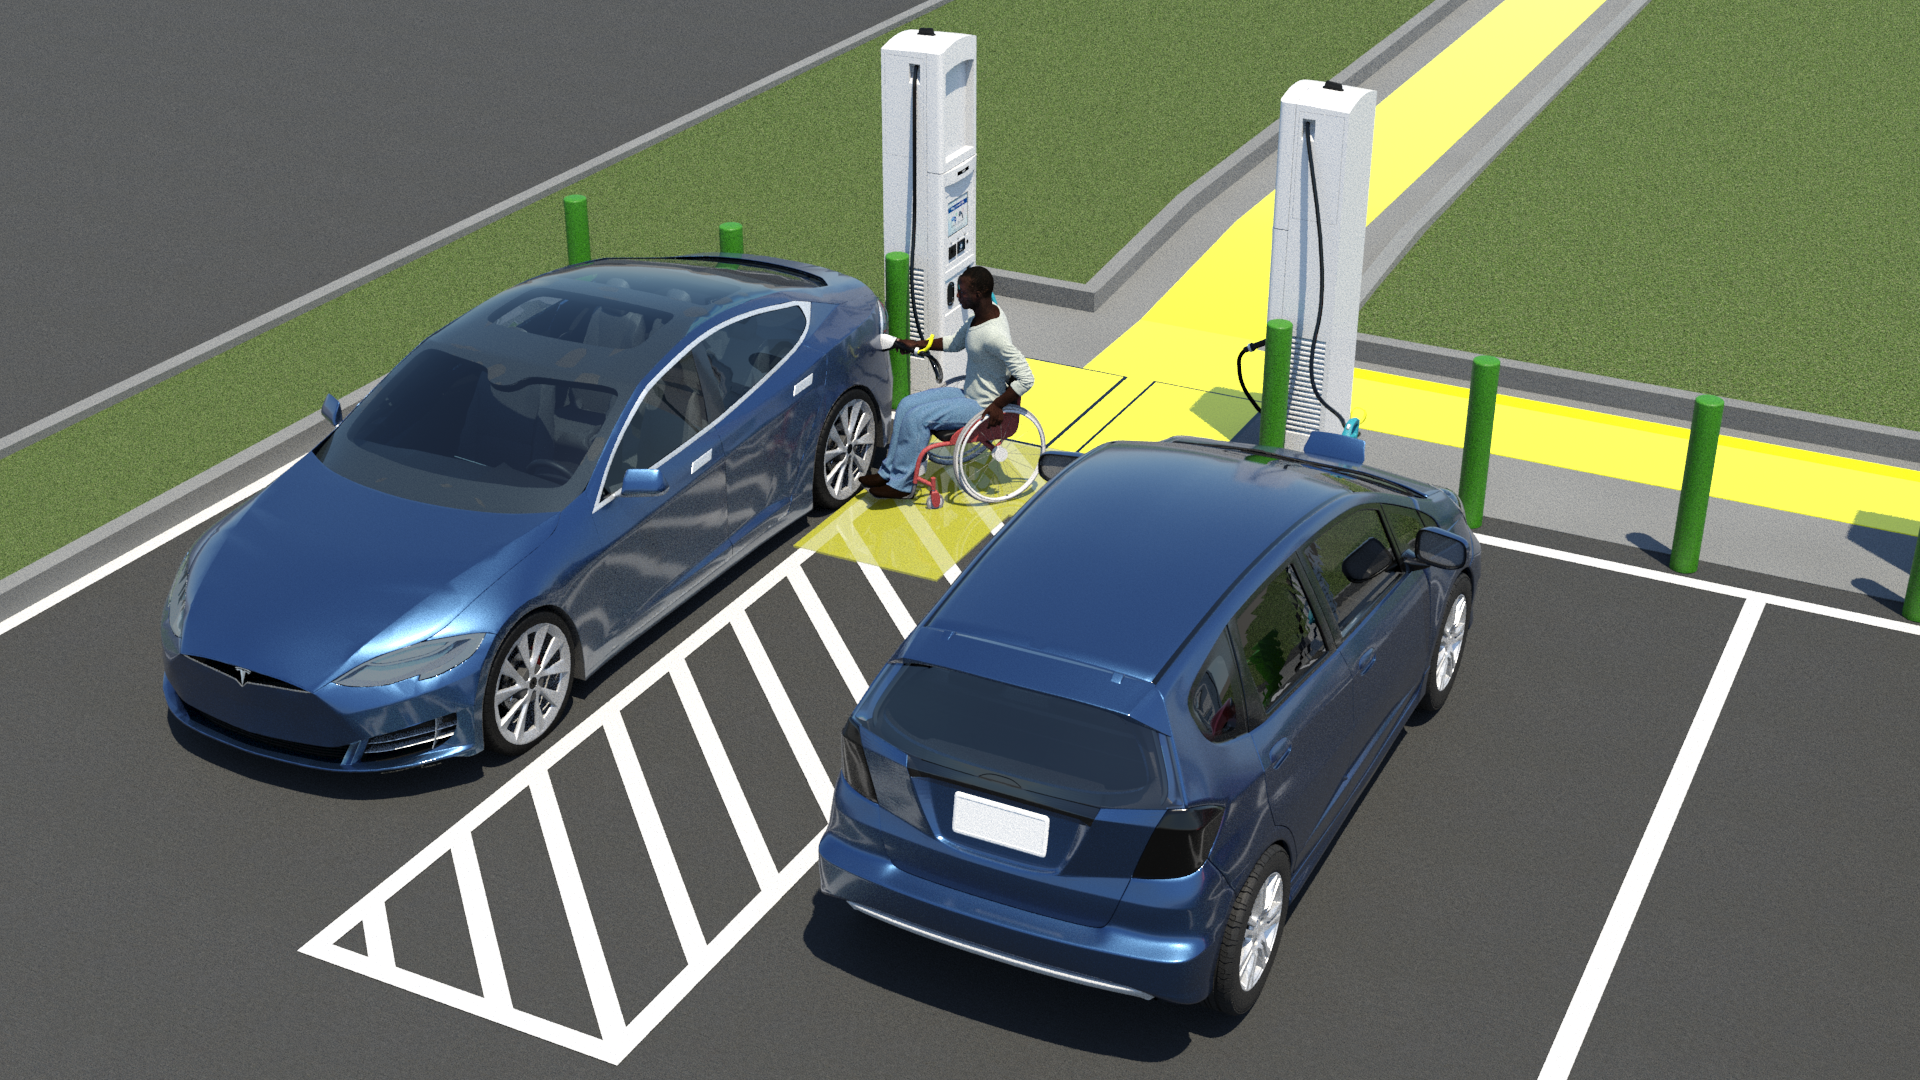 Perspective view of two EV charging spaces sharing a center access aisle. Vehicle on the left is backed in to charging space with charger connected to driver side rear charging inlet. Vehicle on the right is pulled forward into charging space with charger connected to front vehicle charging inlet. Both EV chargers are at the head of the charging spaces and protected by green bollards. EV chargers are rotated so they both face the center access aisle. (The EV charger on the left is rotated to face the right and has clear floor space on the right, and the EV charger on the right is rotated to face the left and has clear floor space on the left). 